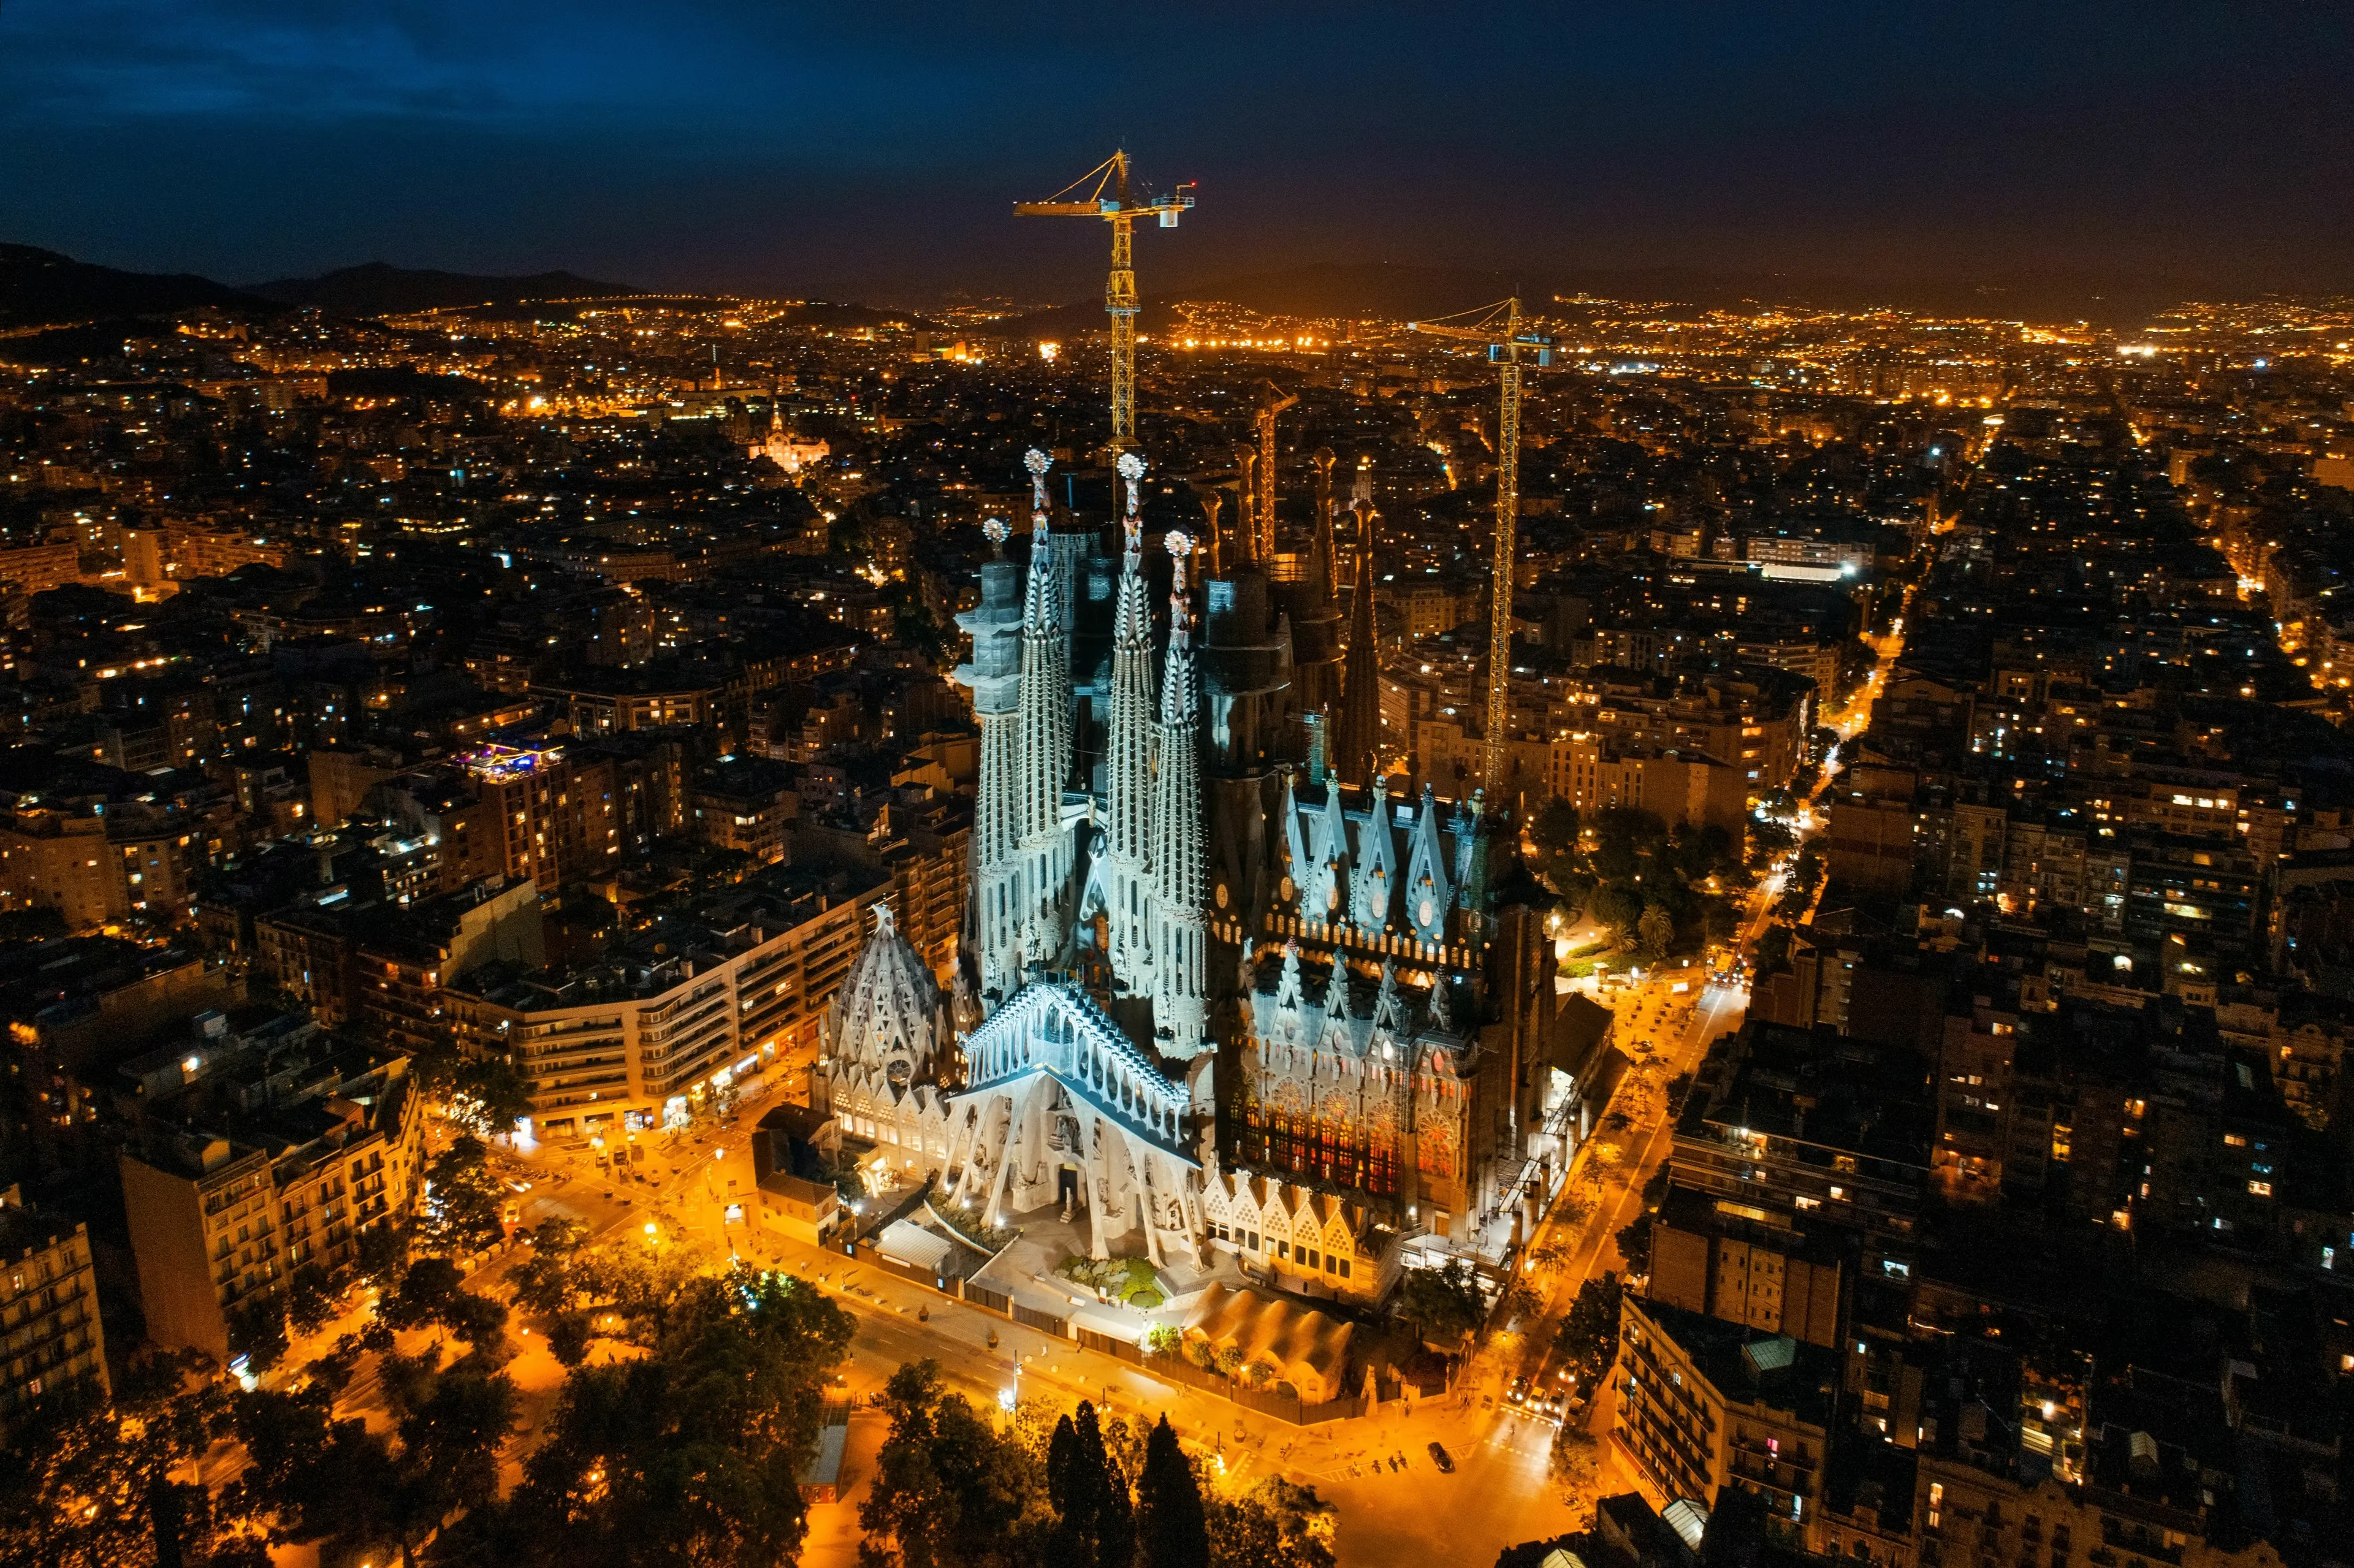 1-Day Barcelona Shopping & Nightlife Adventure with Friends